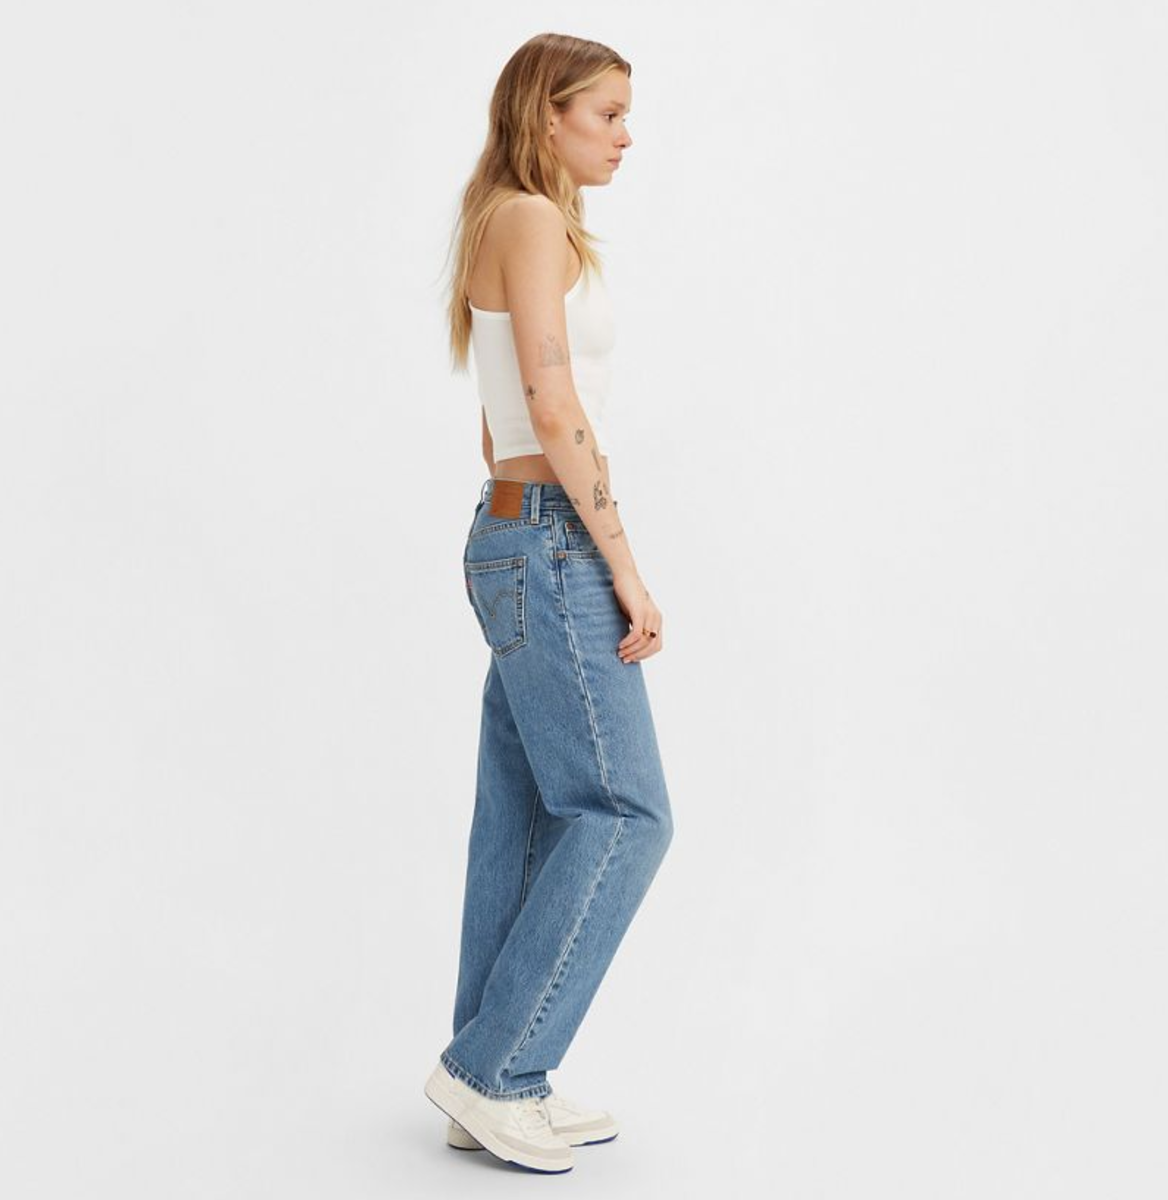 Levi's 501 '90s Original Women's Jeans, $98, available here.